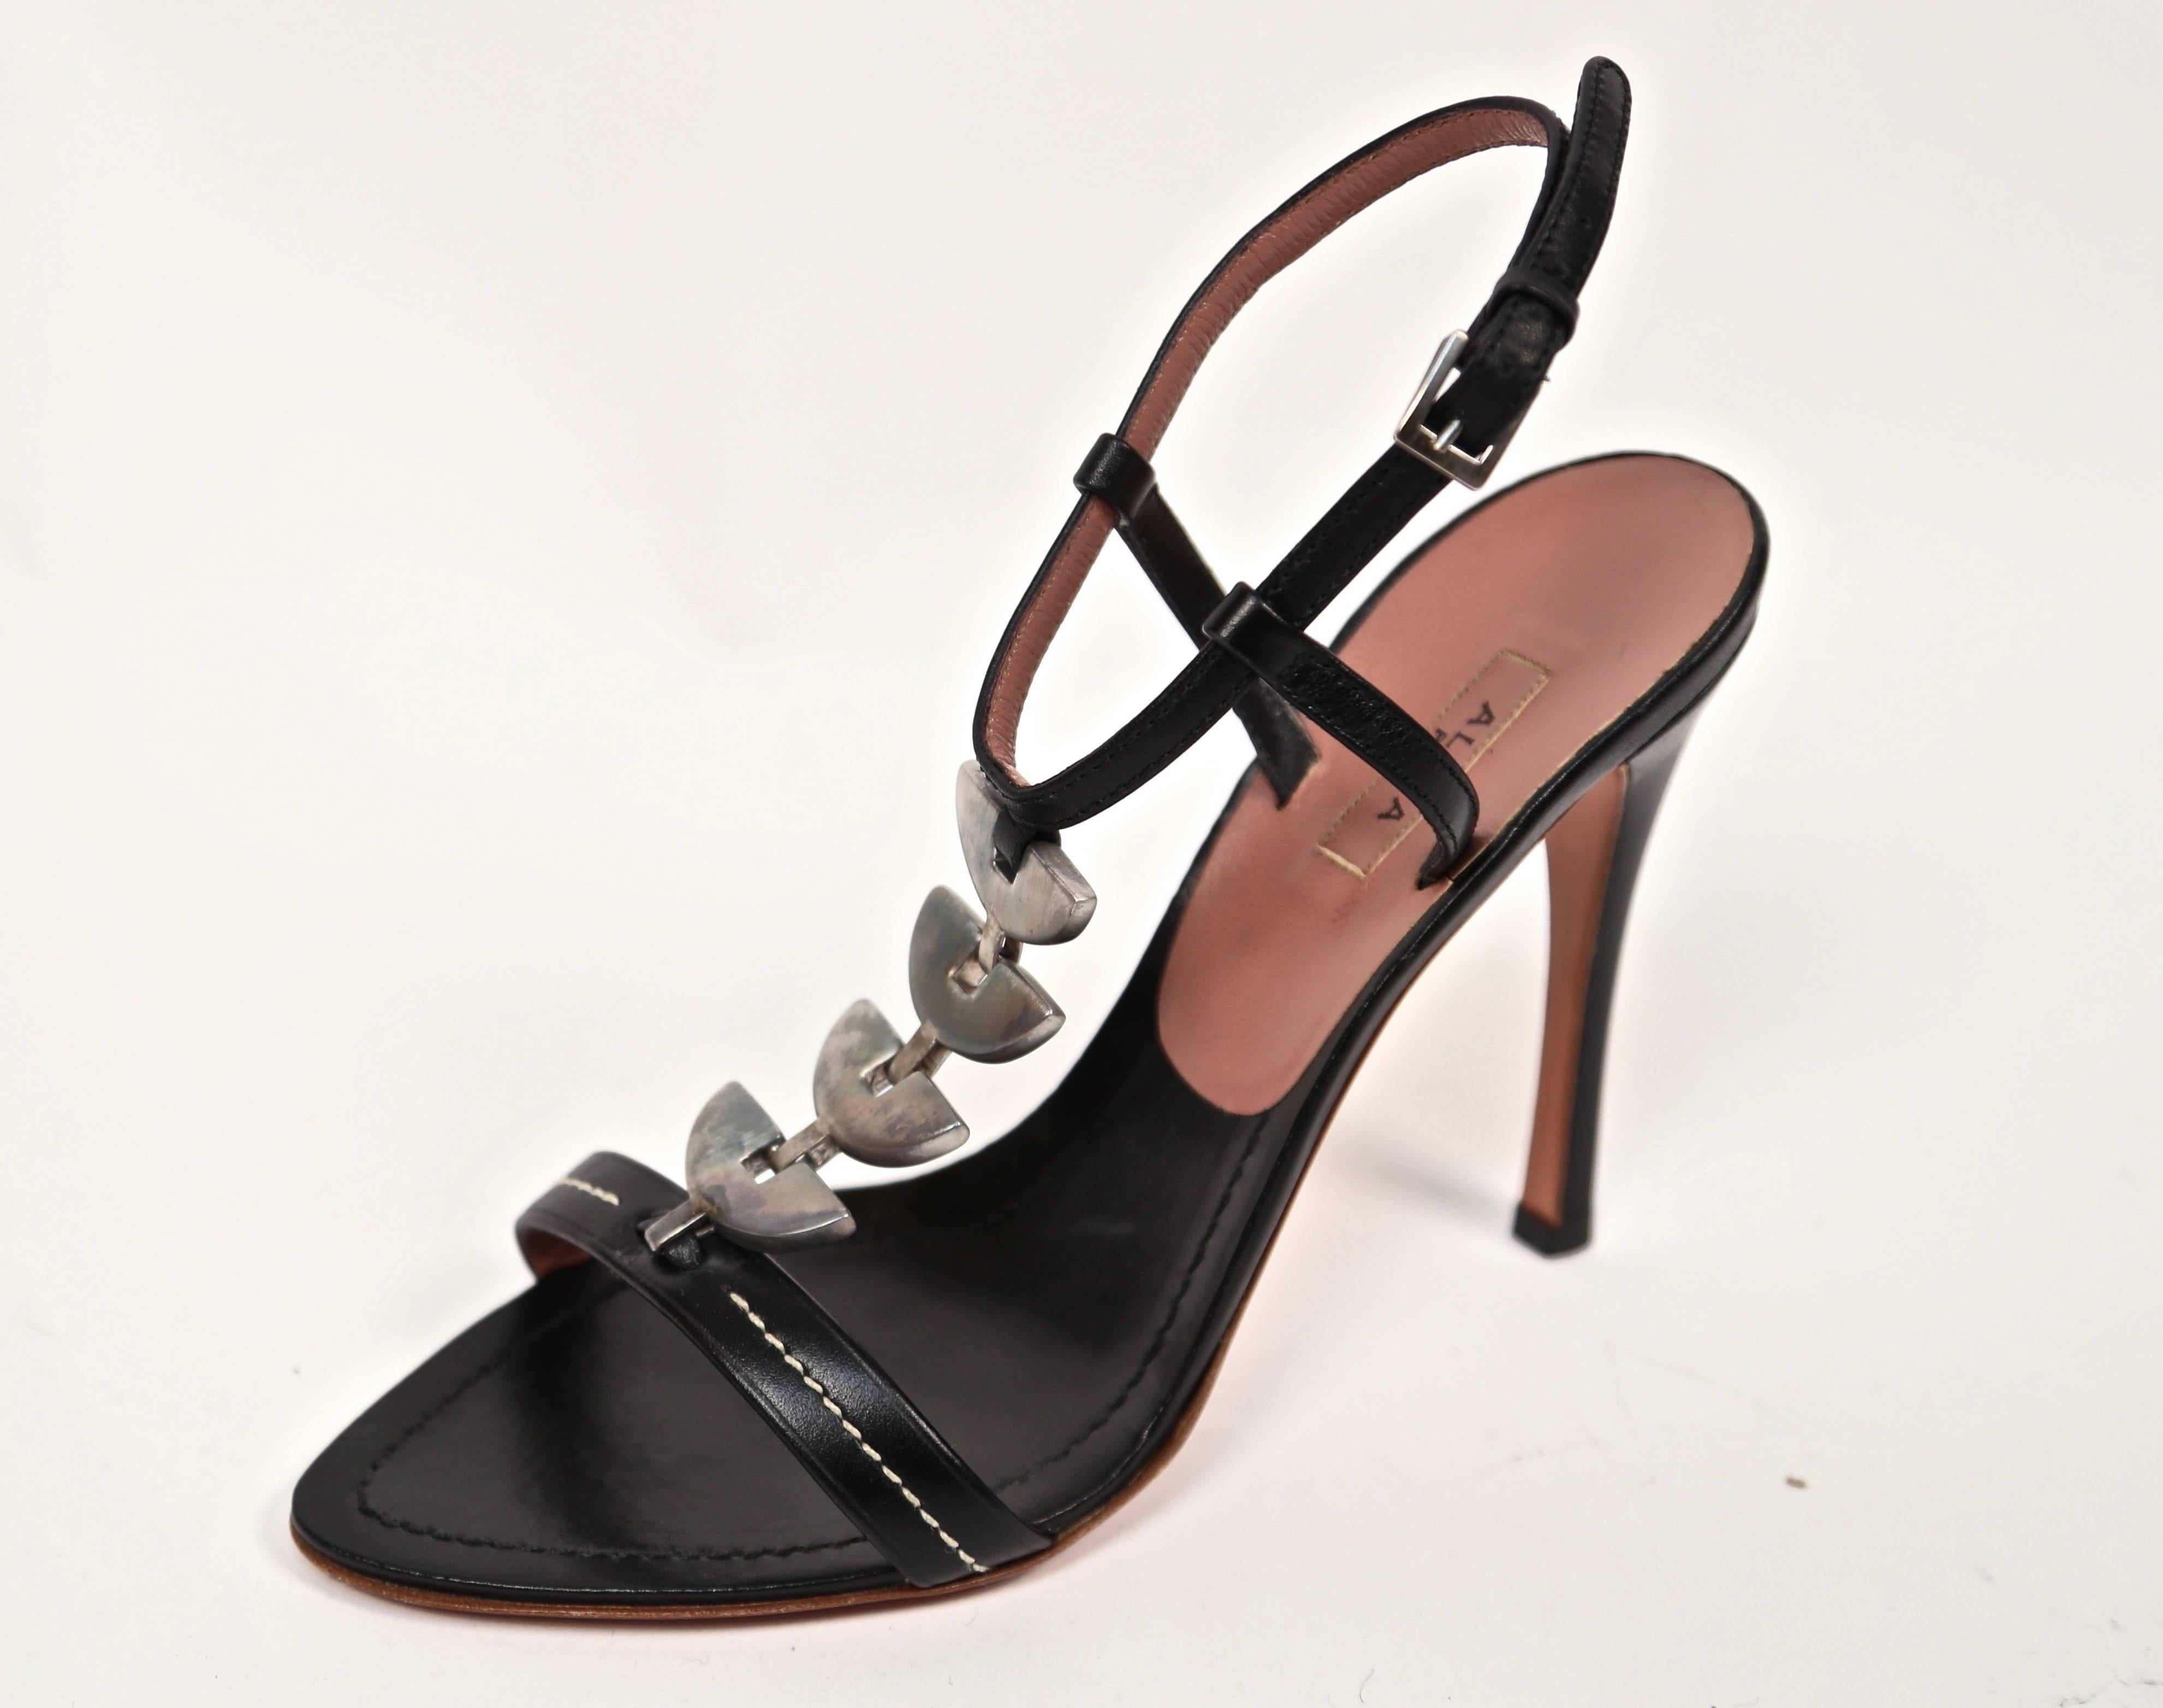 Jet black leather heels with silver hardware designed by Azzedine Alaia. French size 37. Approximate measurements: length just over 9.75